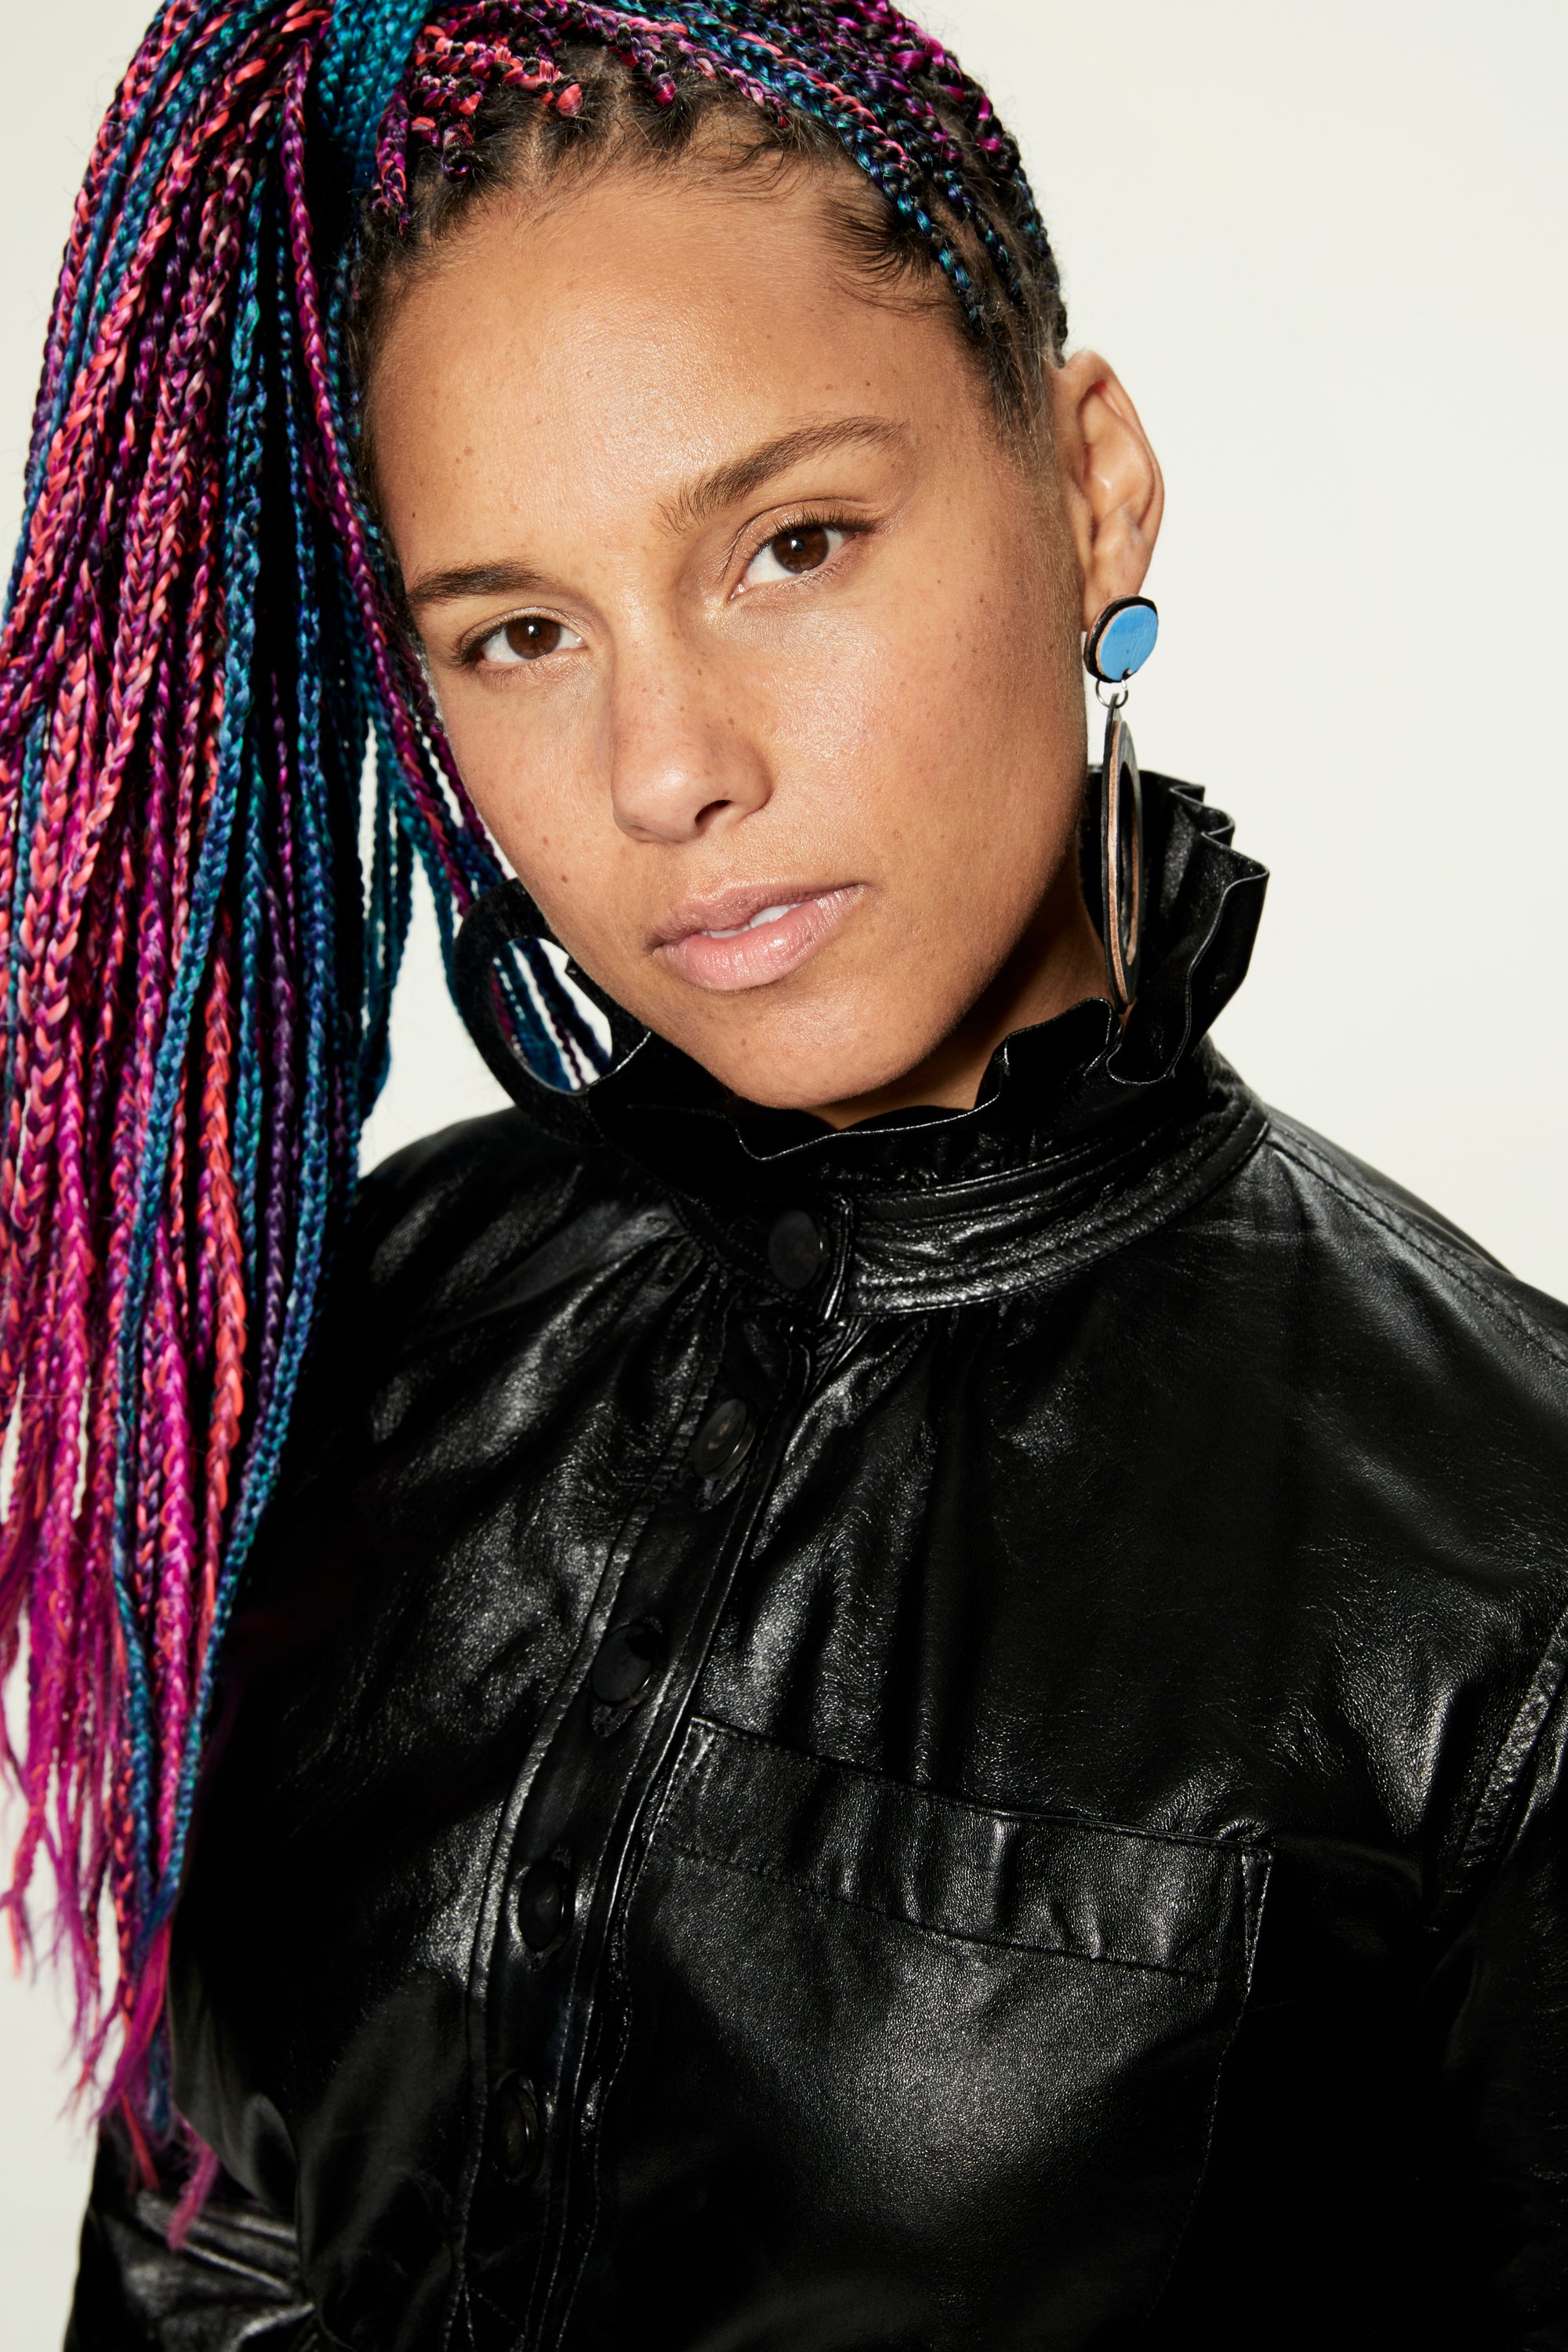 12 Beautiful Bright Braided Styles Just In Time For Festival Season
